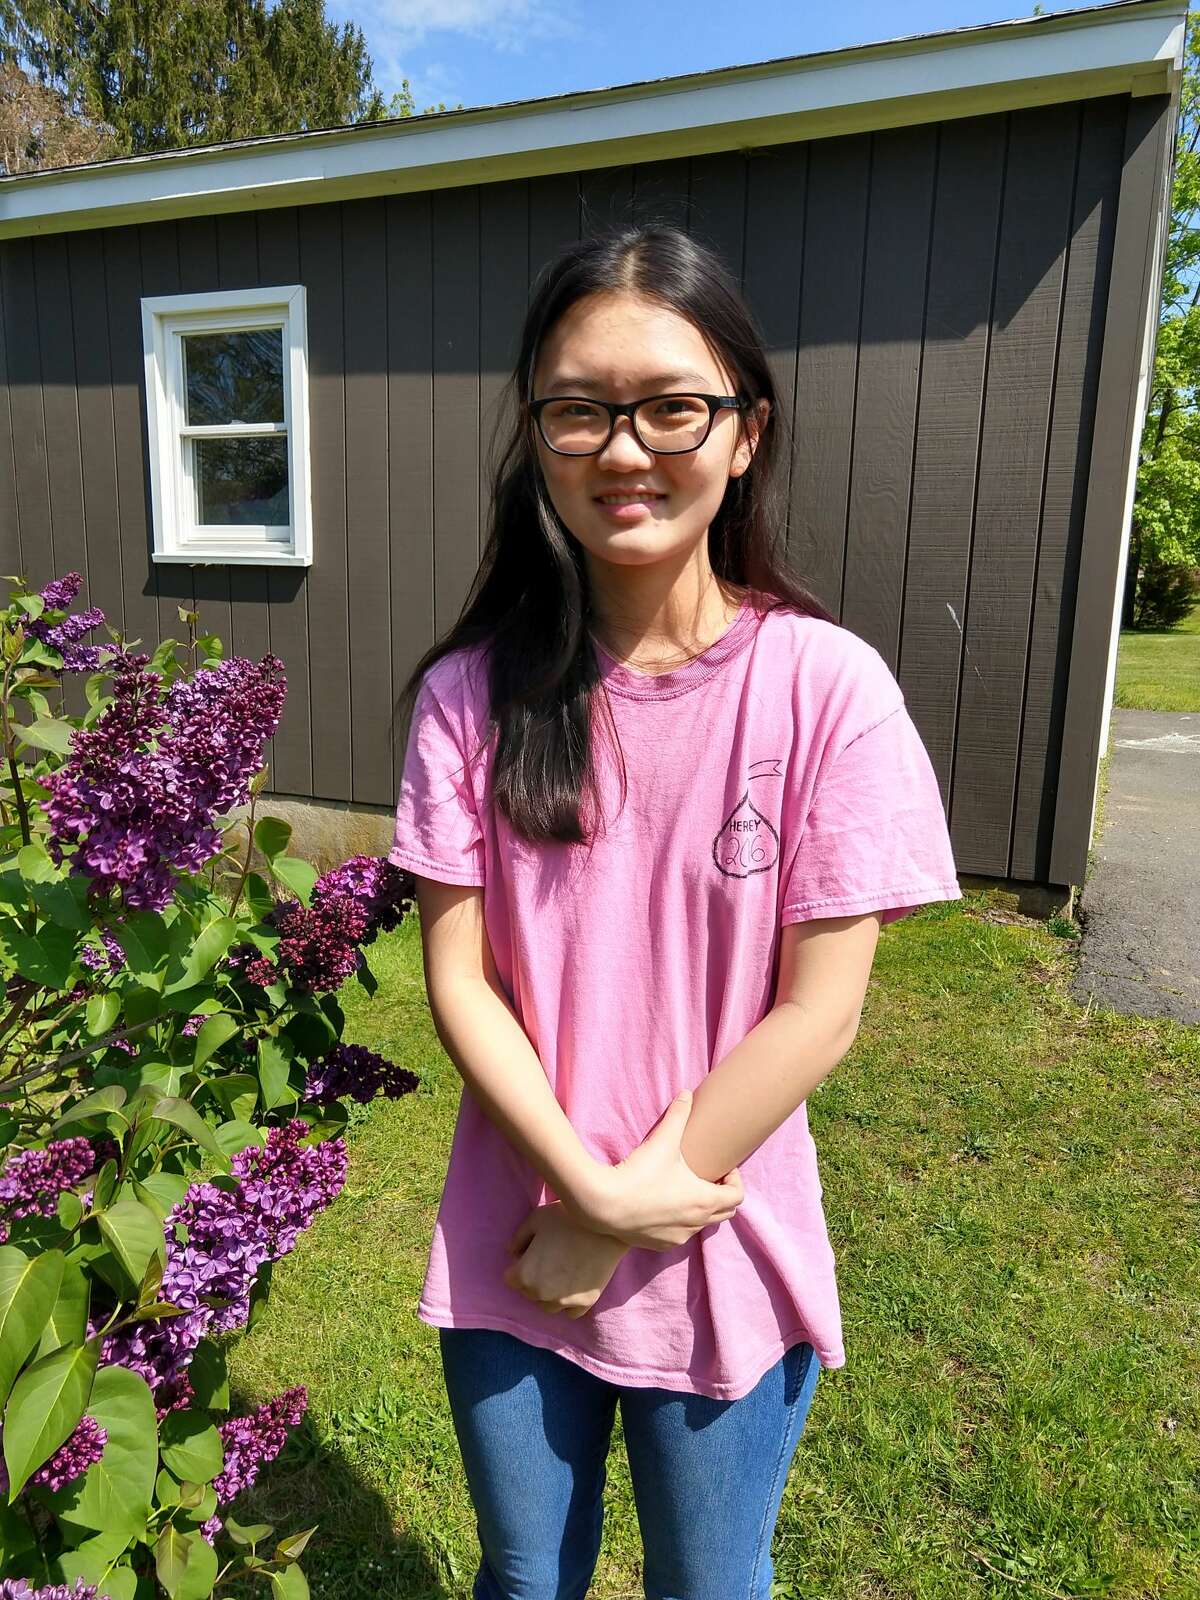 Middletown High School — Huiyan Wang Hometown: Middletown Intended university, major: Northeastern University, cell and molecular biology Accolades: 2019 Superintendent’s Award, 2019 Connecticut Governor's Scholar Award, Harvard Book Award, AP Scholar with Distinction Award, treasurer of the Key Club, Future Business Leaders of America, Chemistry Olympiad, Tri-M Music Honor Society, MHS Wind Ensemble Band, MHS Math Team, New England Math League, MHS Marching Band, National Honor Society